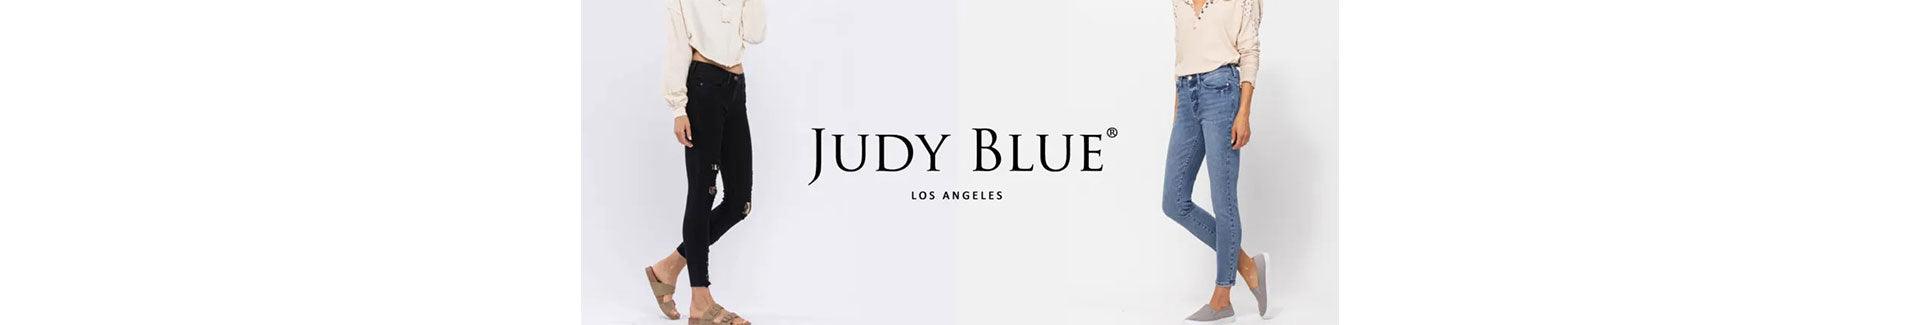 Judy Blue Jeans for Women on Sale - Daily Fashion